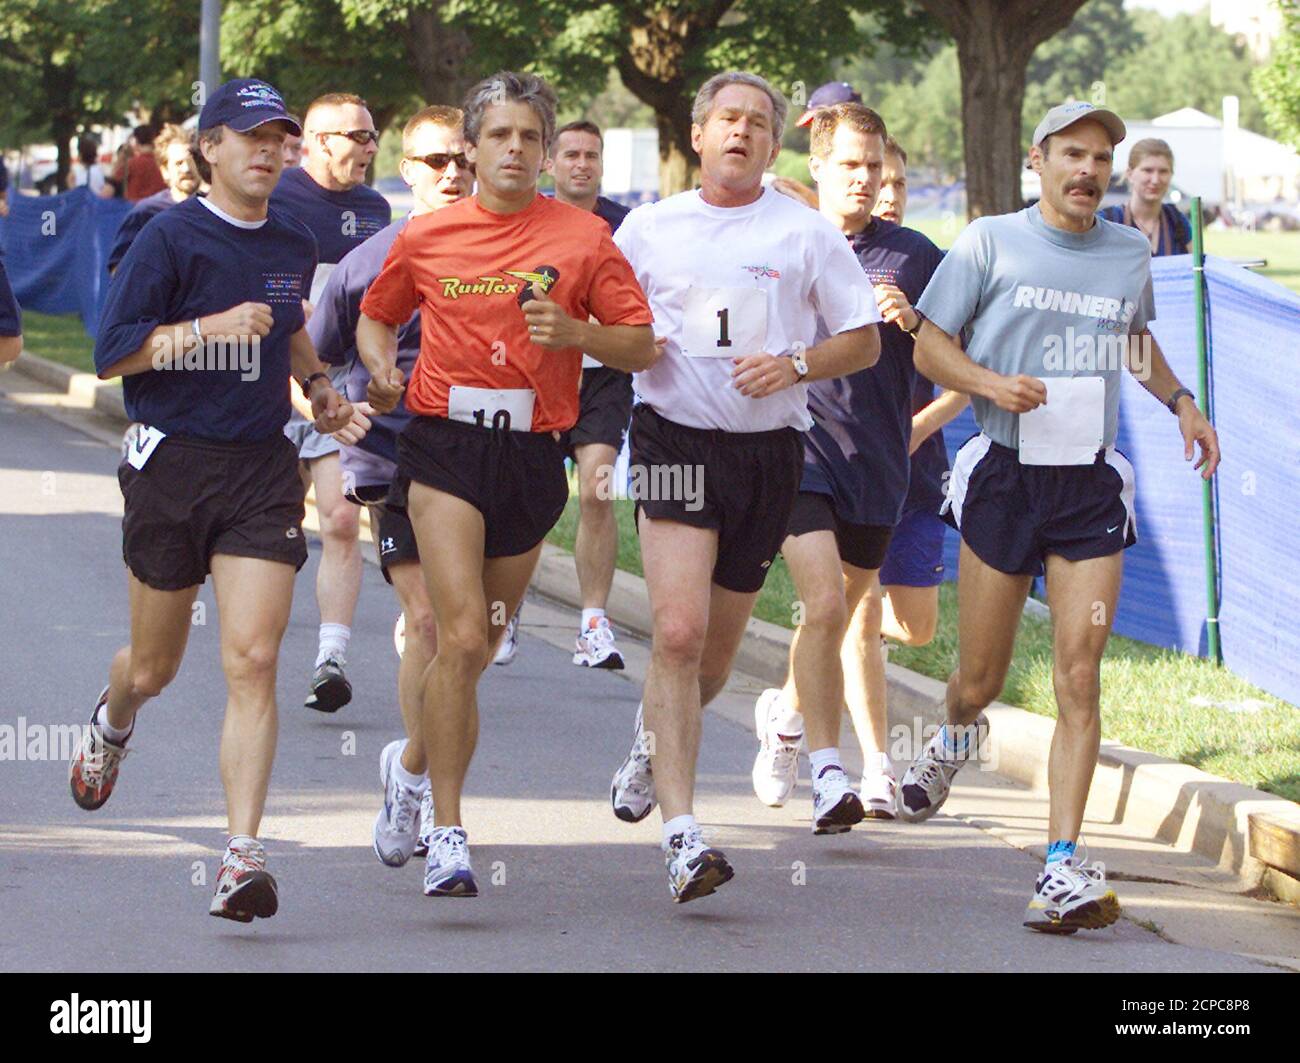 U.S. President George W. Bush (1) runs in The President's Fitness Challenge, a three-mile run at Fort McNair in Washington, June 22, 2002. Bush finished the run at 20 minutes and 28 seconds. The president unveiled his HealthierUS initiative on Thursday which calls for at least a half-hour of exercise every day for adults and more for children, eating smaller portions of more nutritious foods, regular preventative health screenings and avoidance of any risky behaviors, especially involving alcohol, tobacco and illegal drugs. REUTERS/Hyungwon Kang  HK Stock Photo